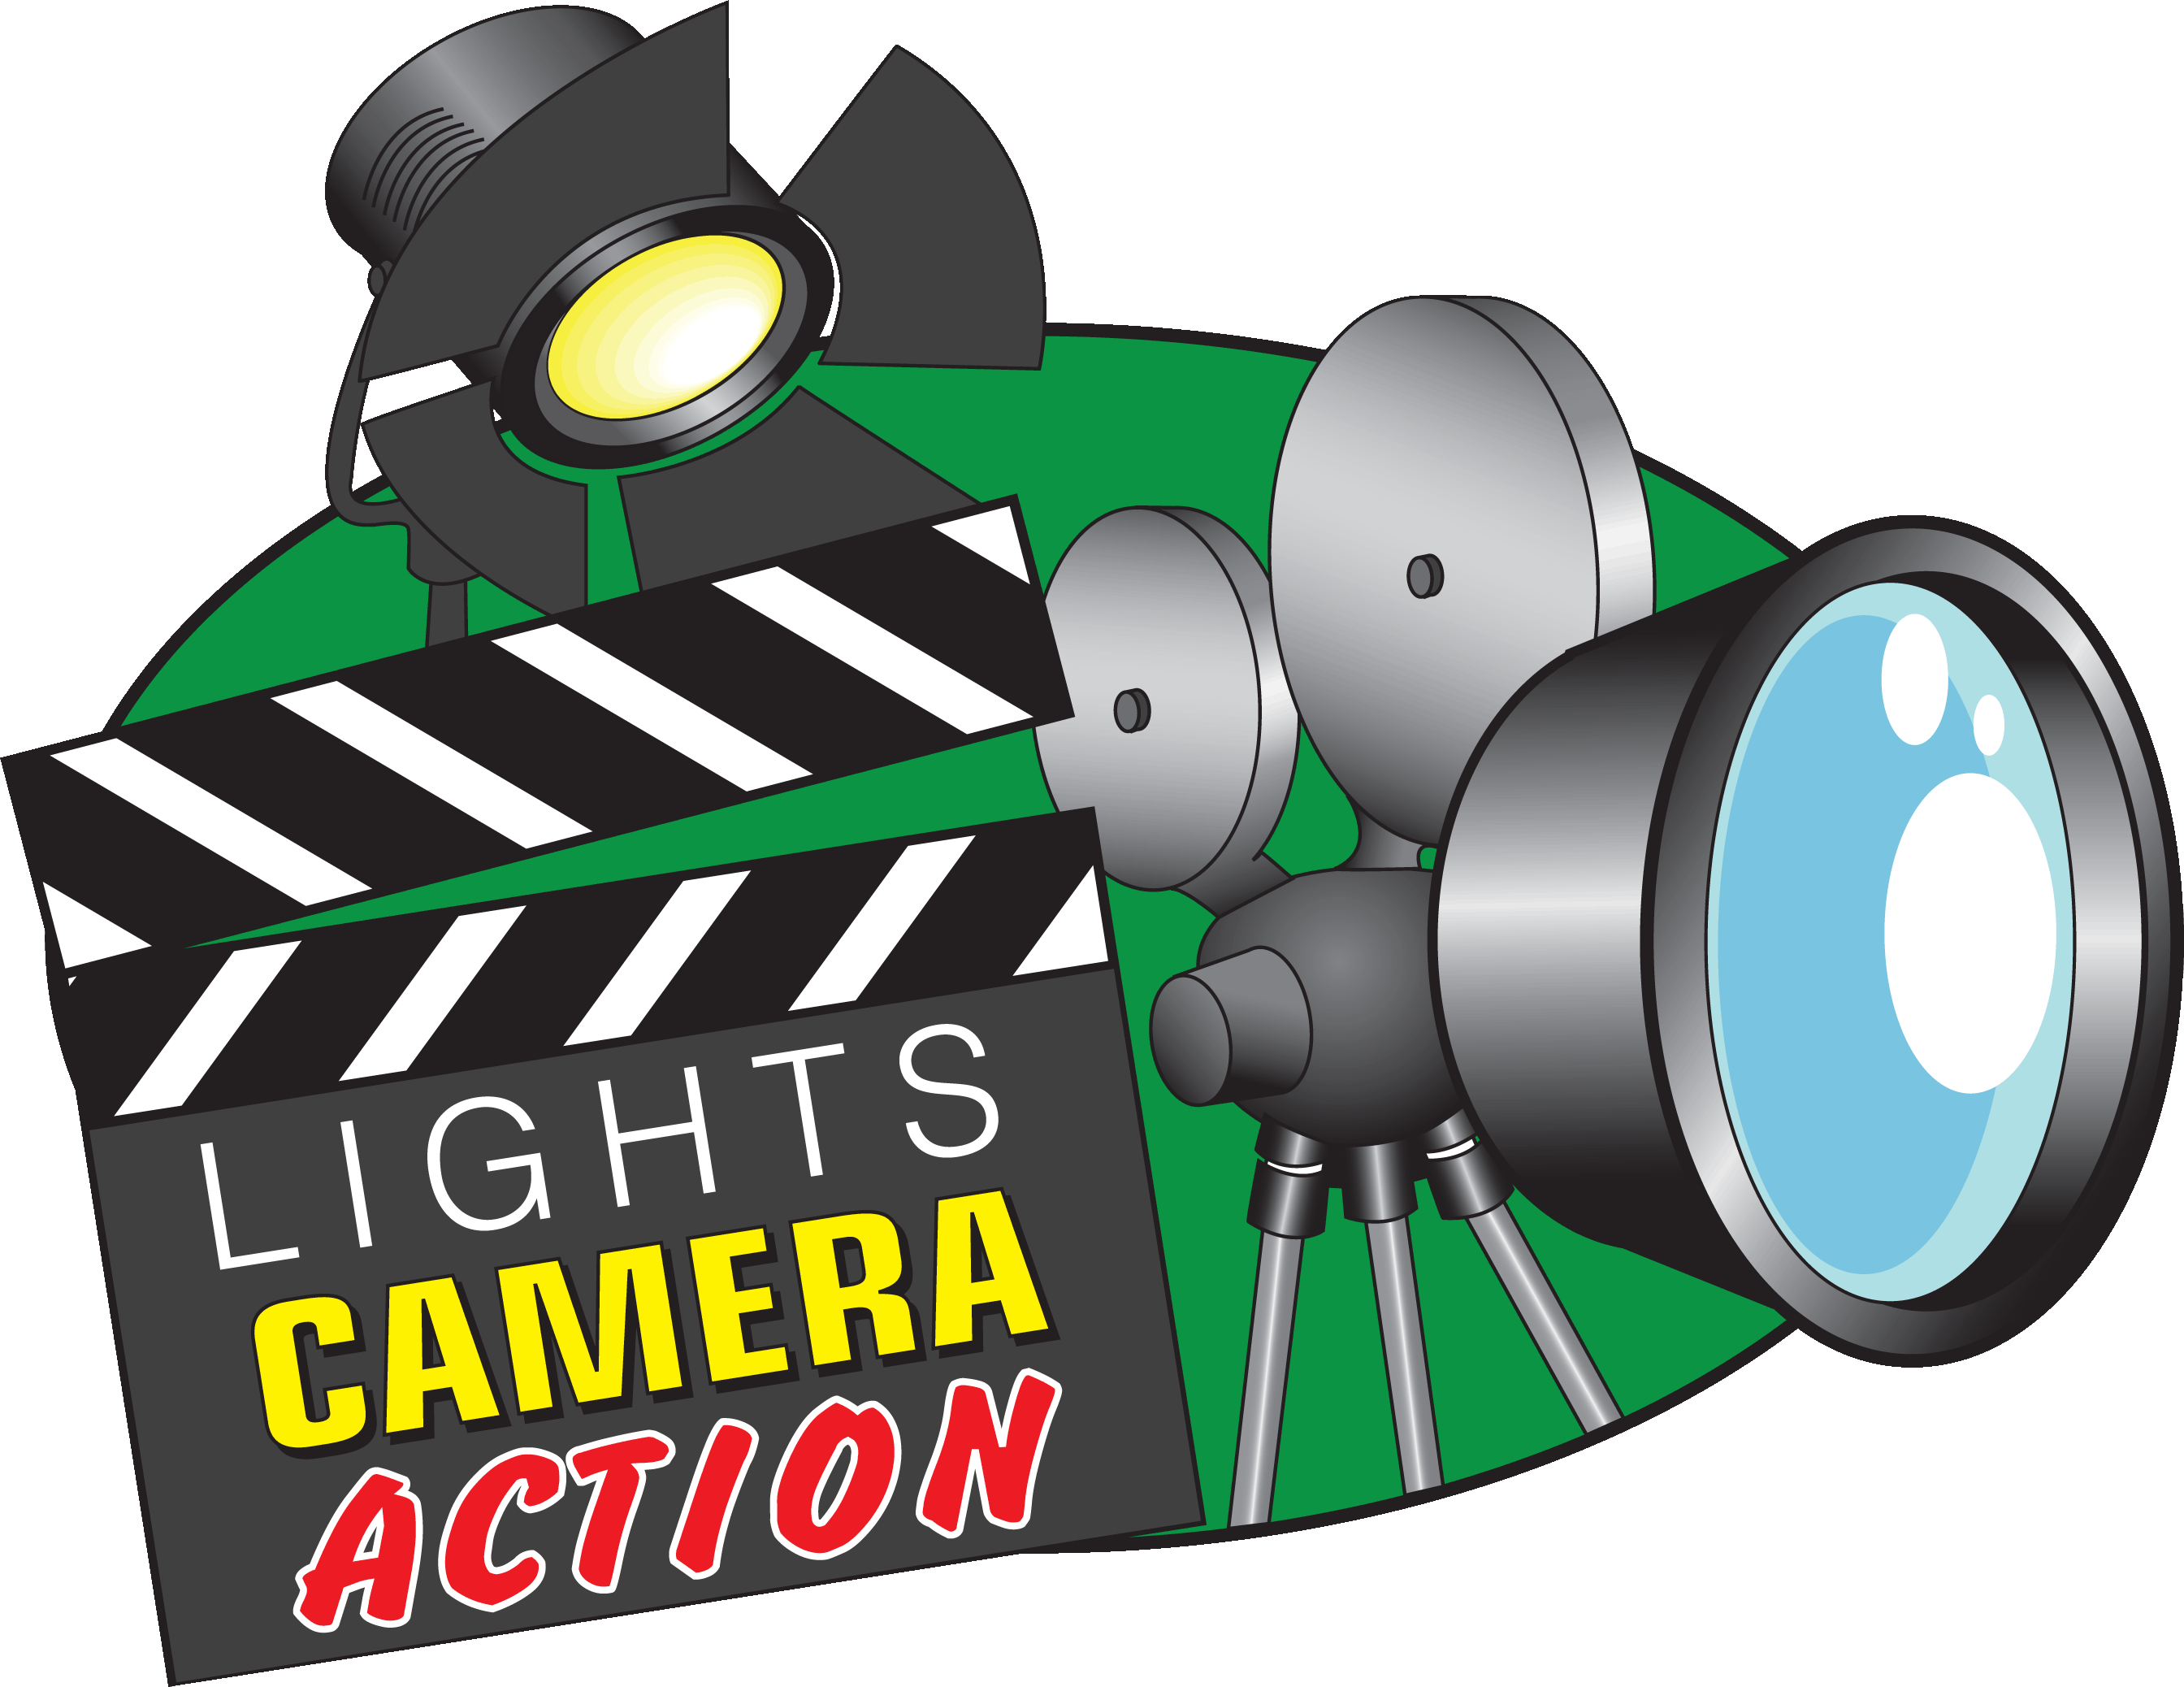 Film Camera (action Sign ) - ClipArt Best